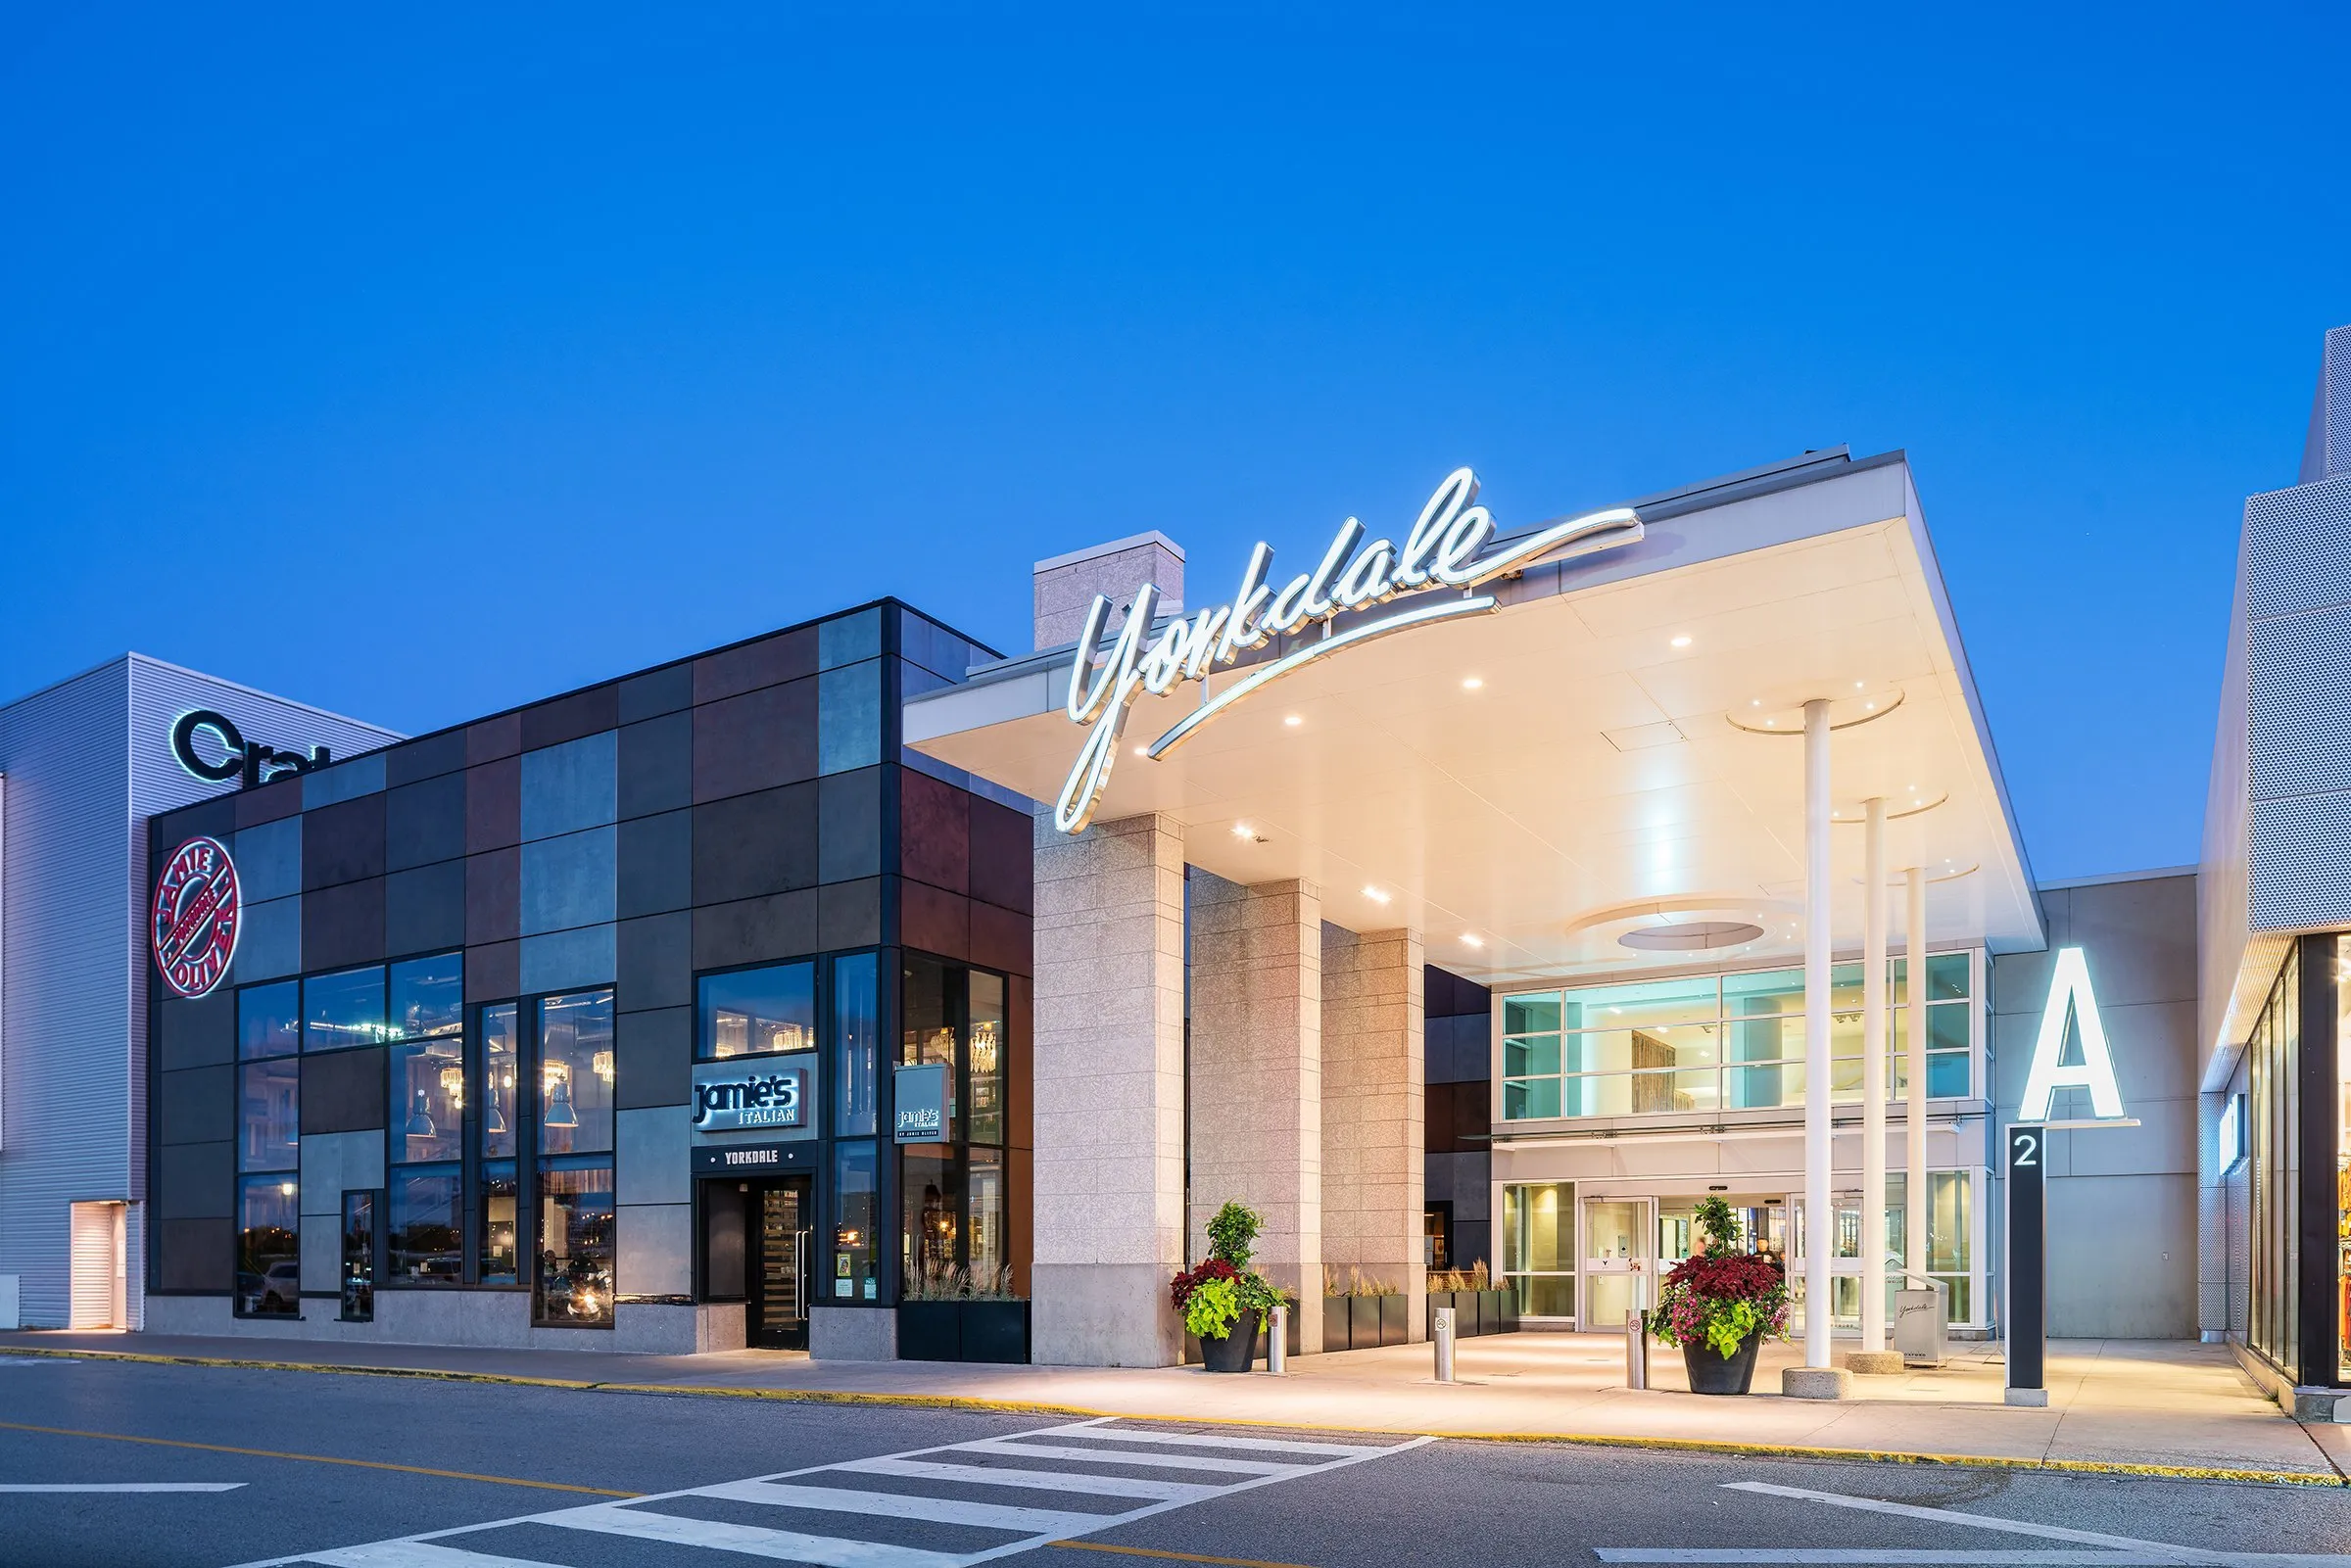 Yorkdale Shopping Centre in Canada, north_america | Handbags,Shoes,Accessories,Clothes,Swimwear - Country Helper